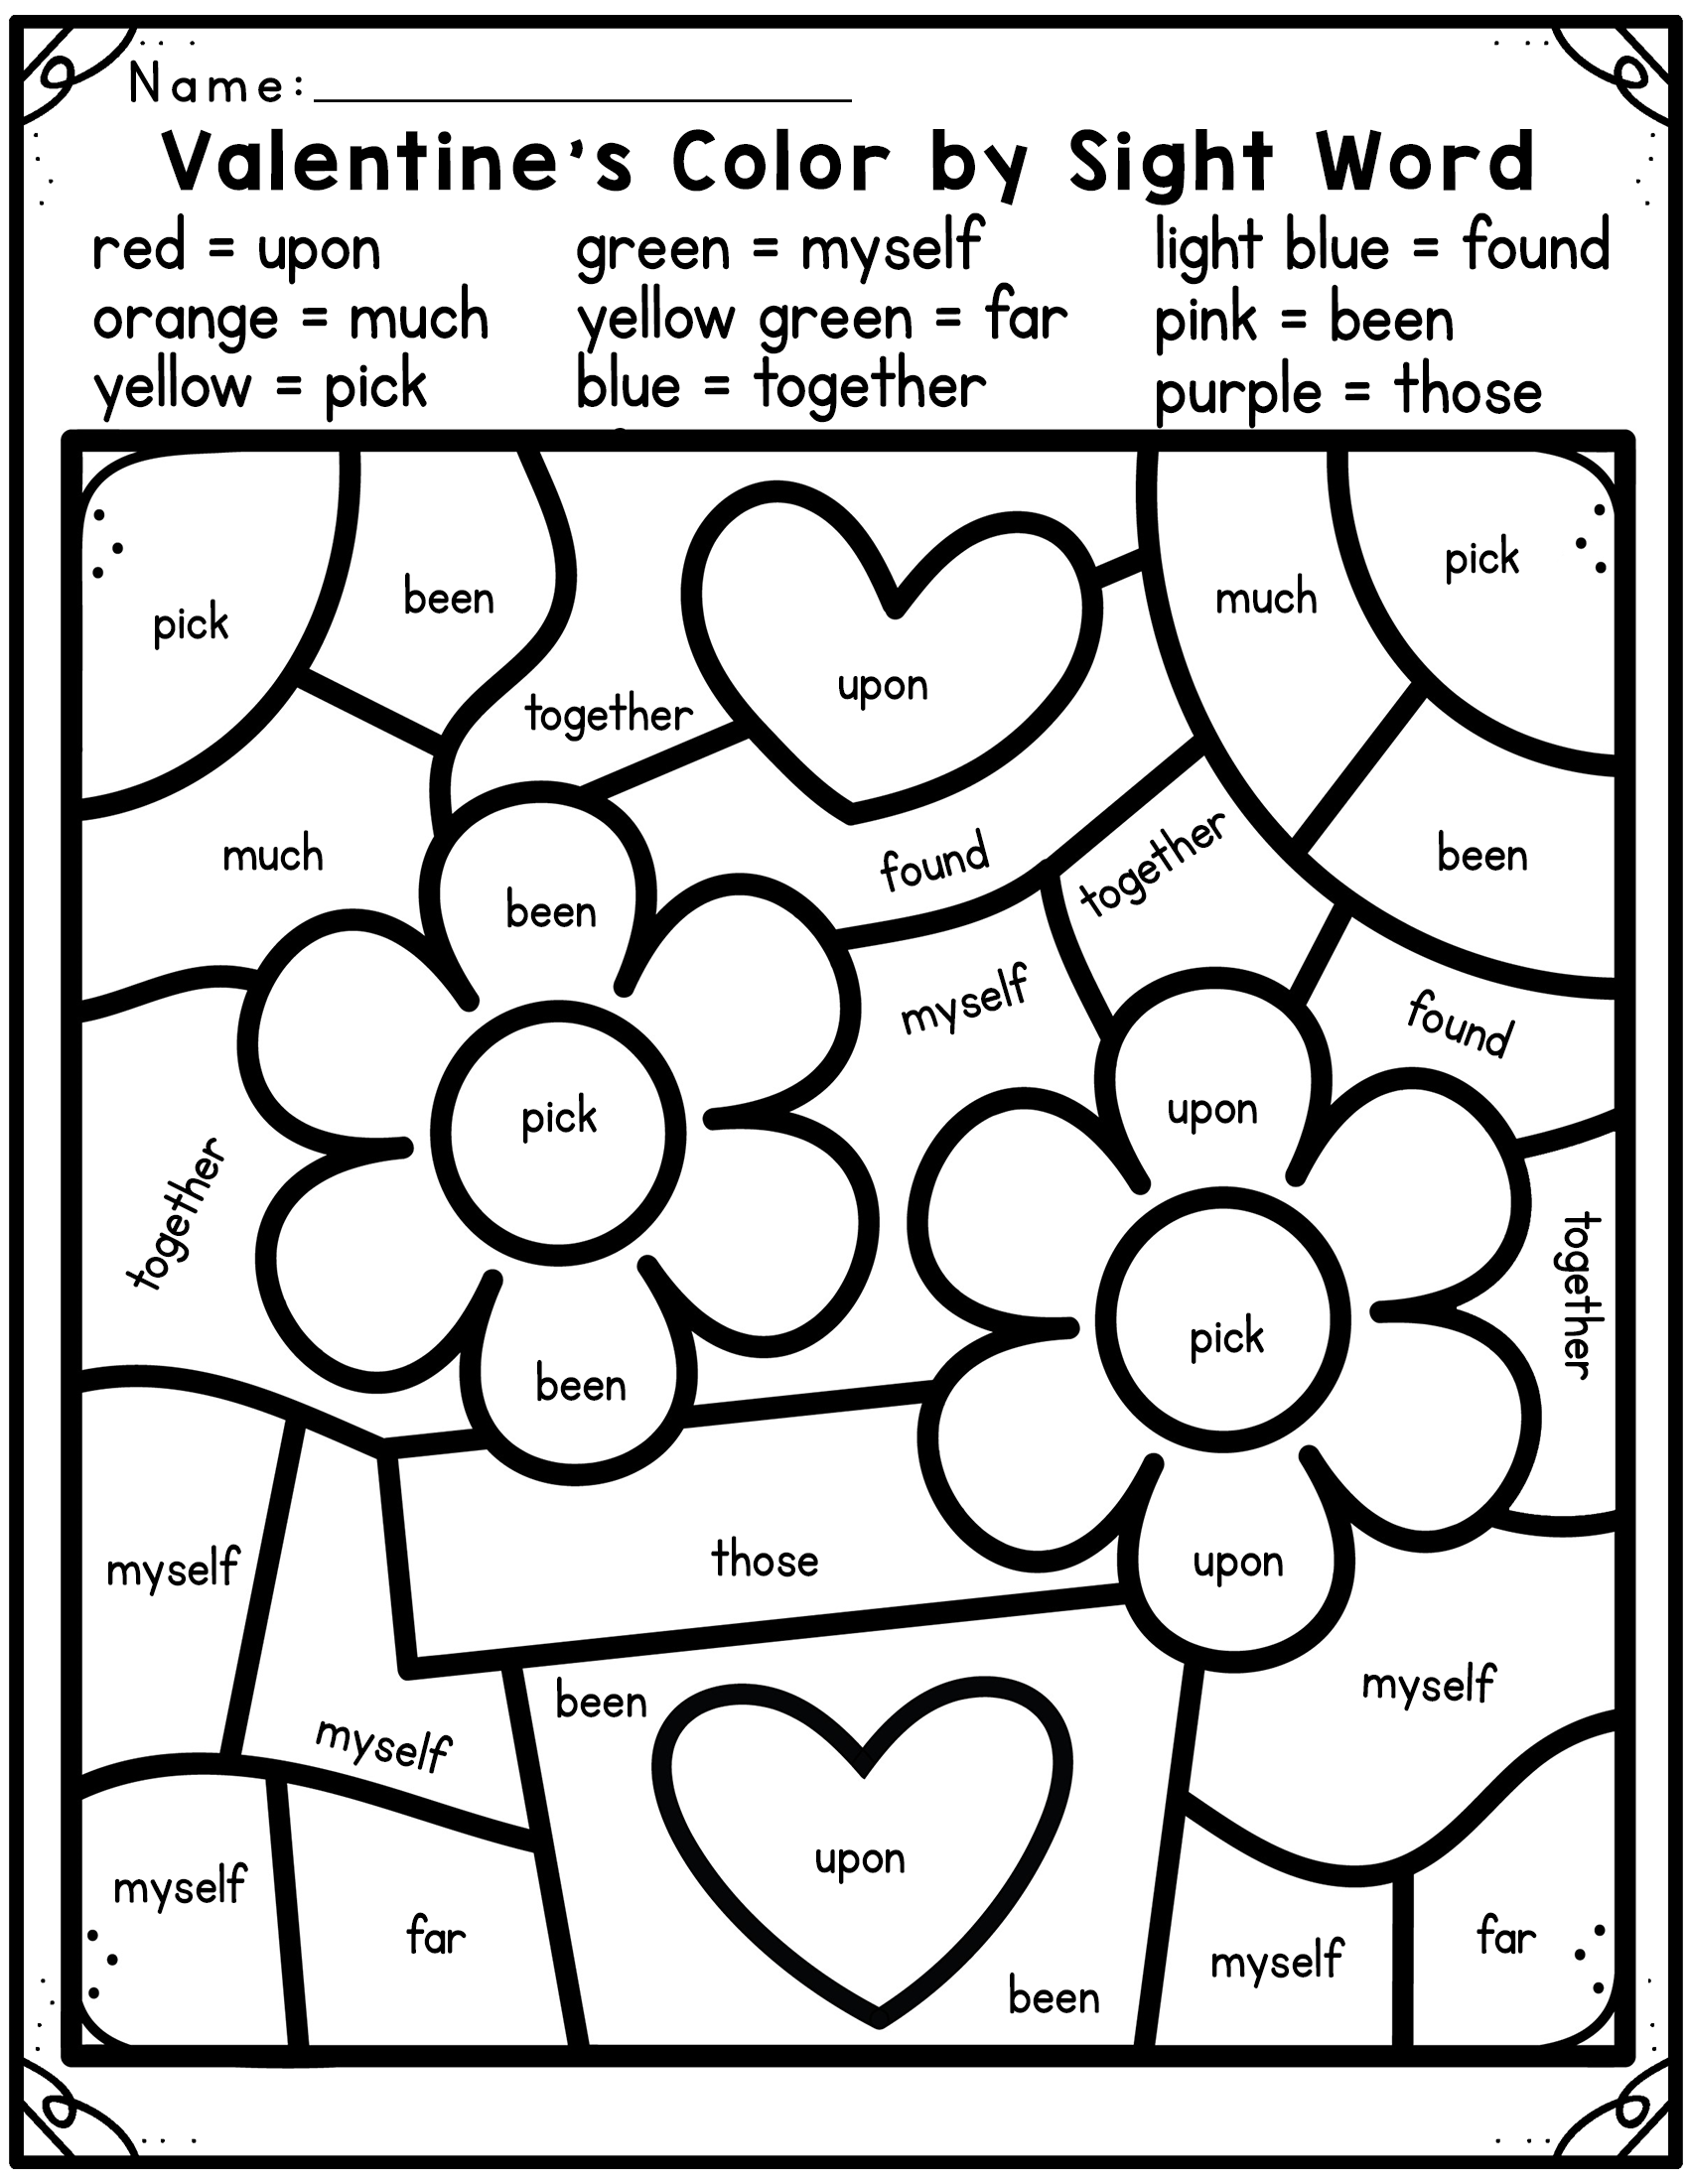 Valentine's Day Color by Sight Word - Made By Teachers